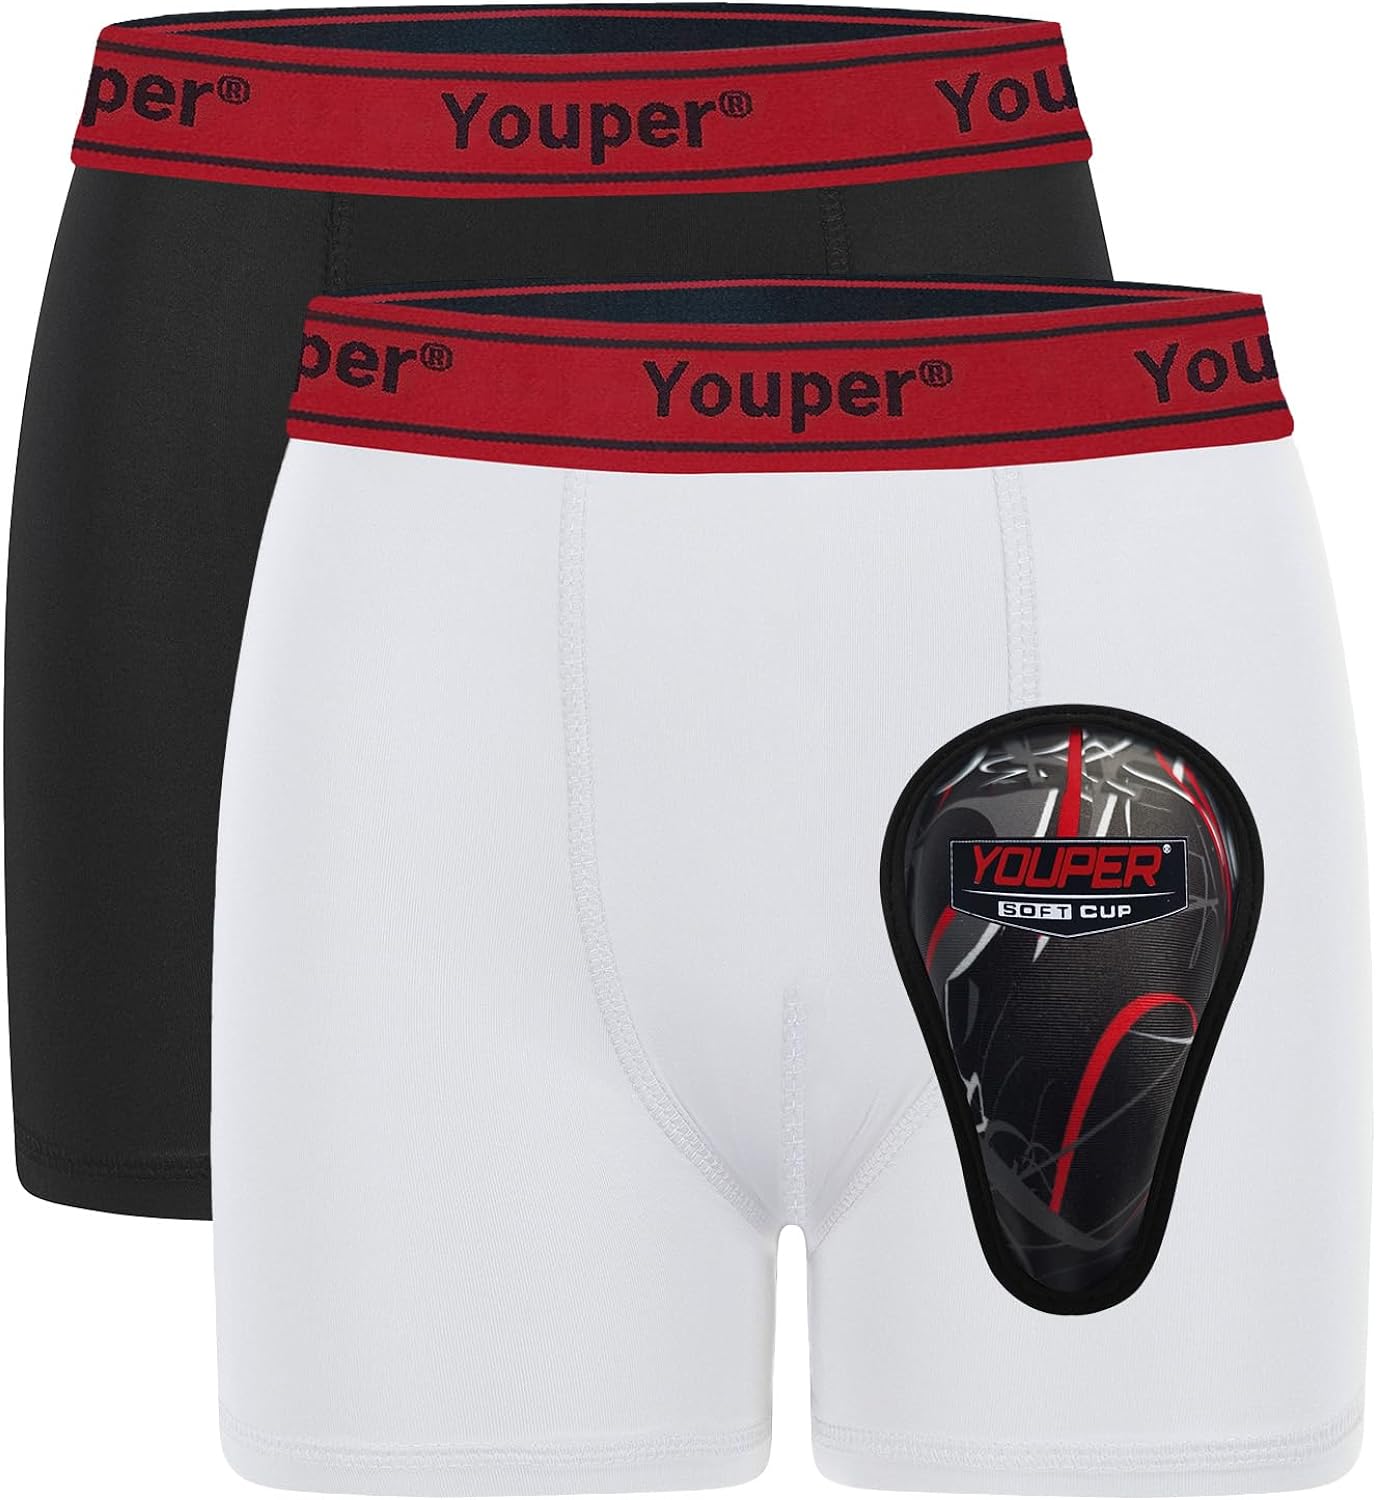  Youper Boys Youth Soft Foam Protective Athletic Cup